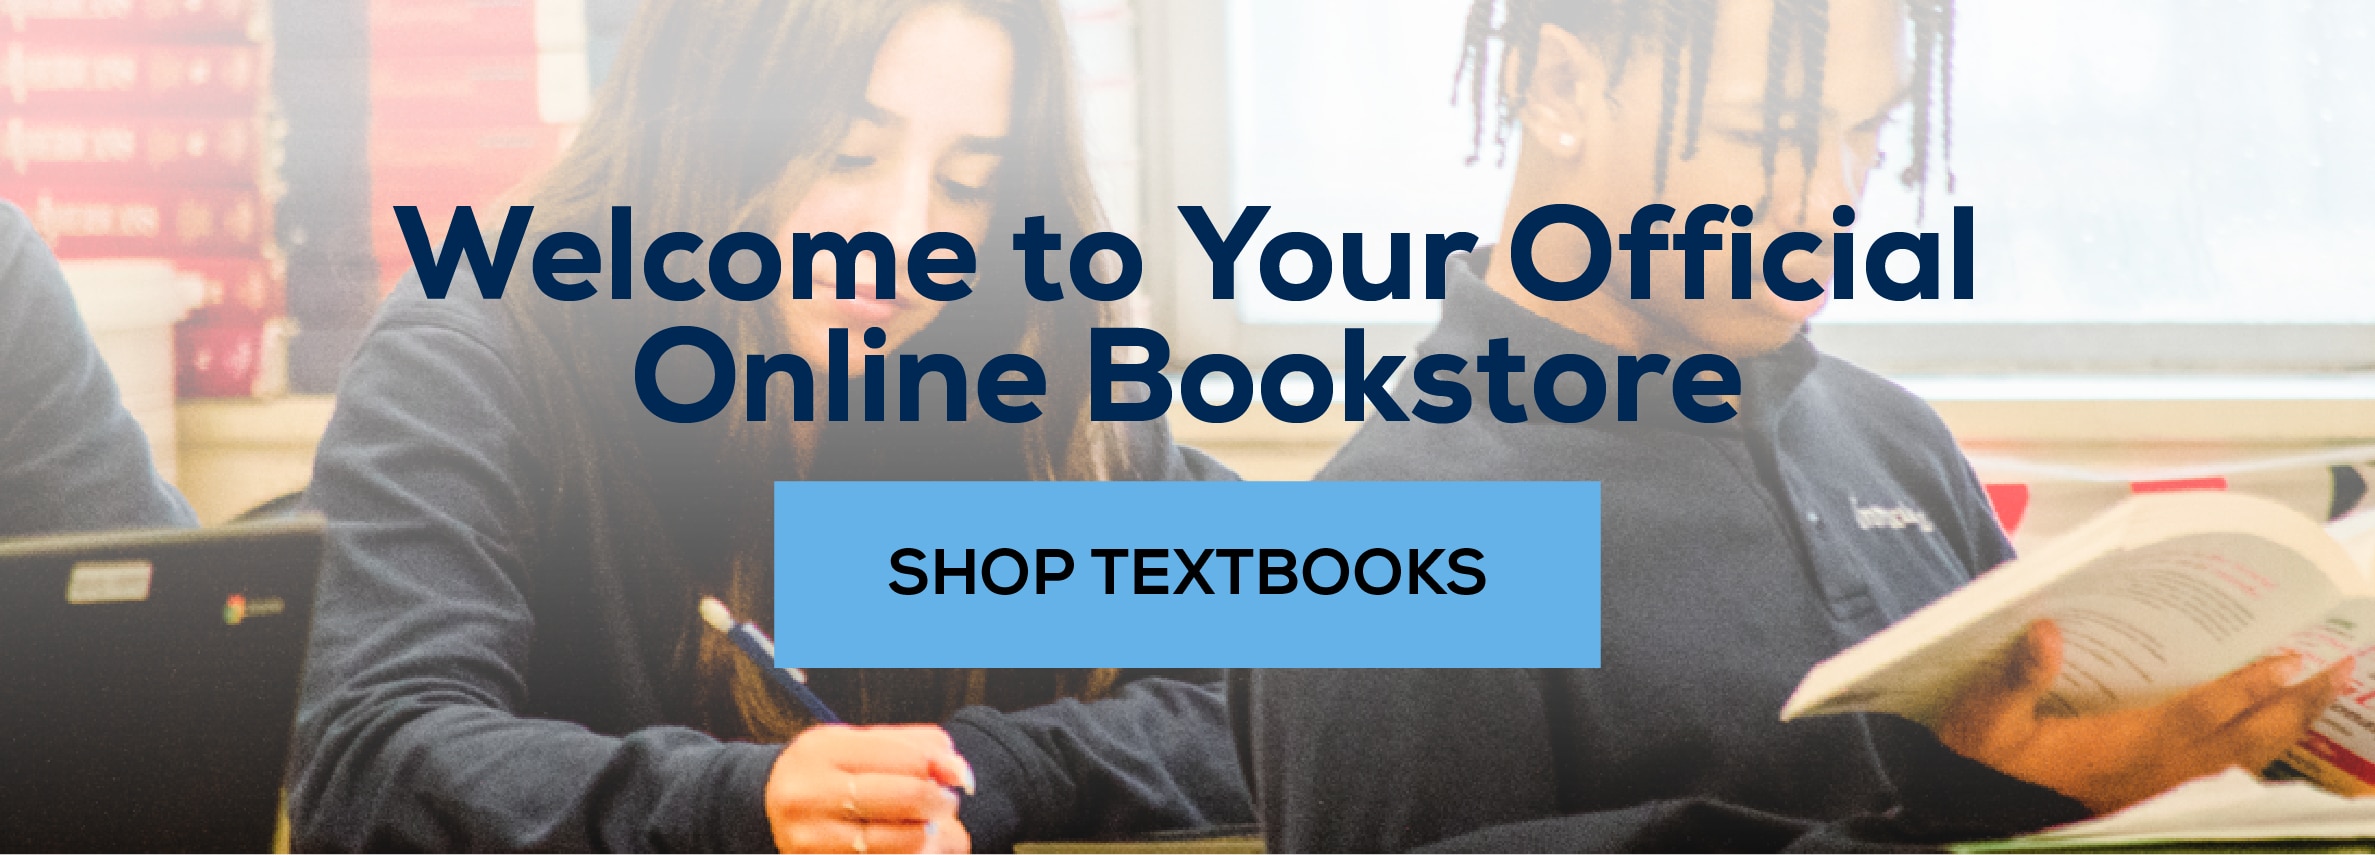 Welcome to your official online bookstore. Shop textbooks